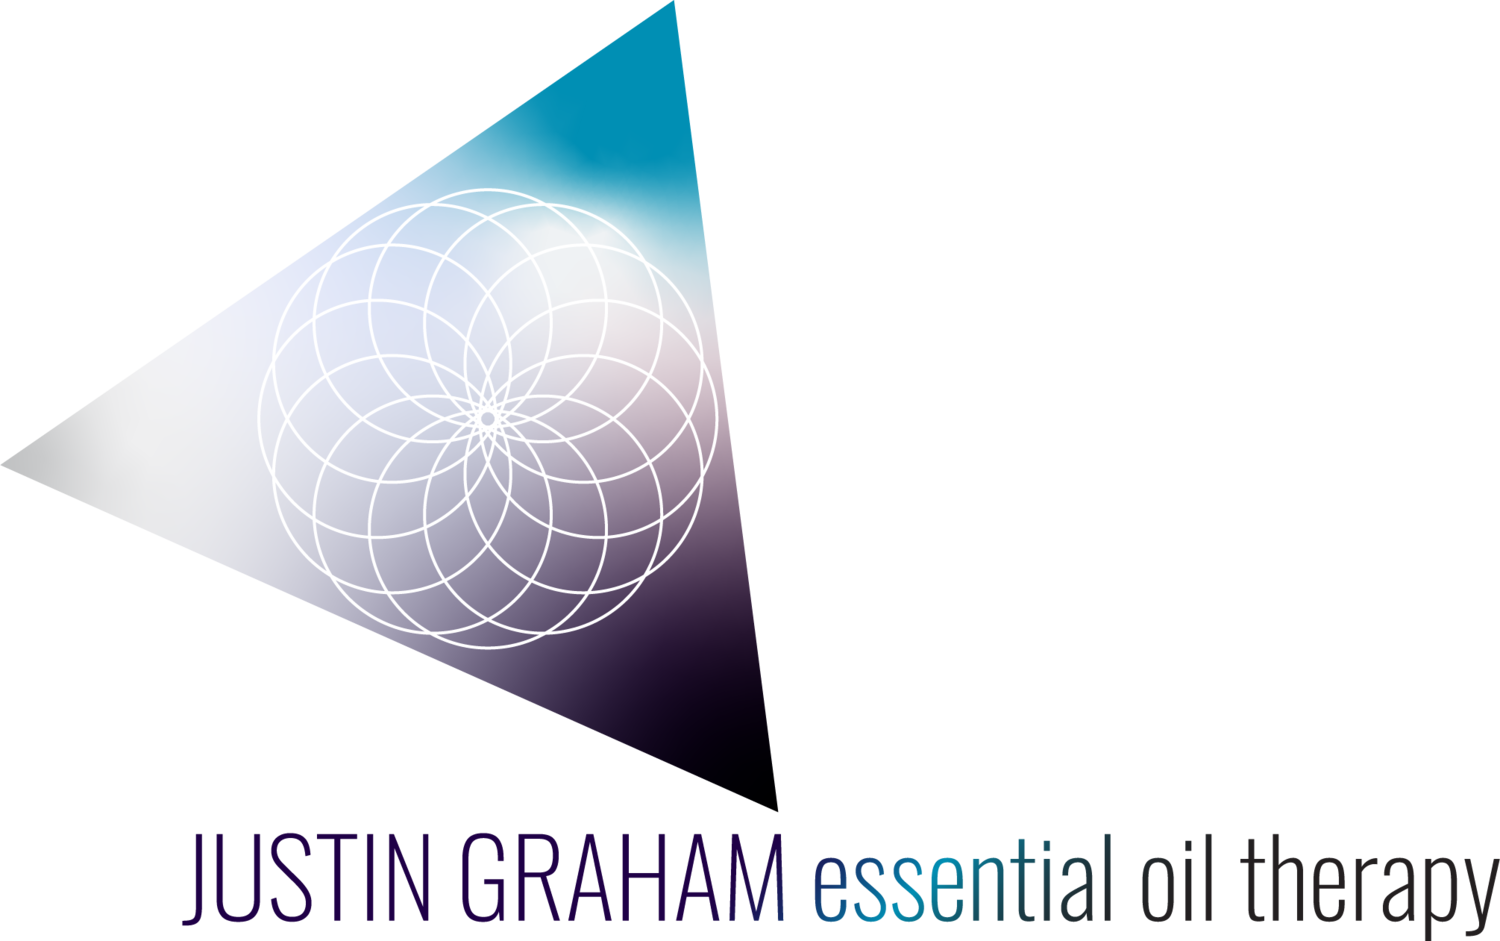 JUSTIN GRAHAM essential oil therapy